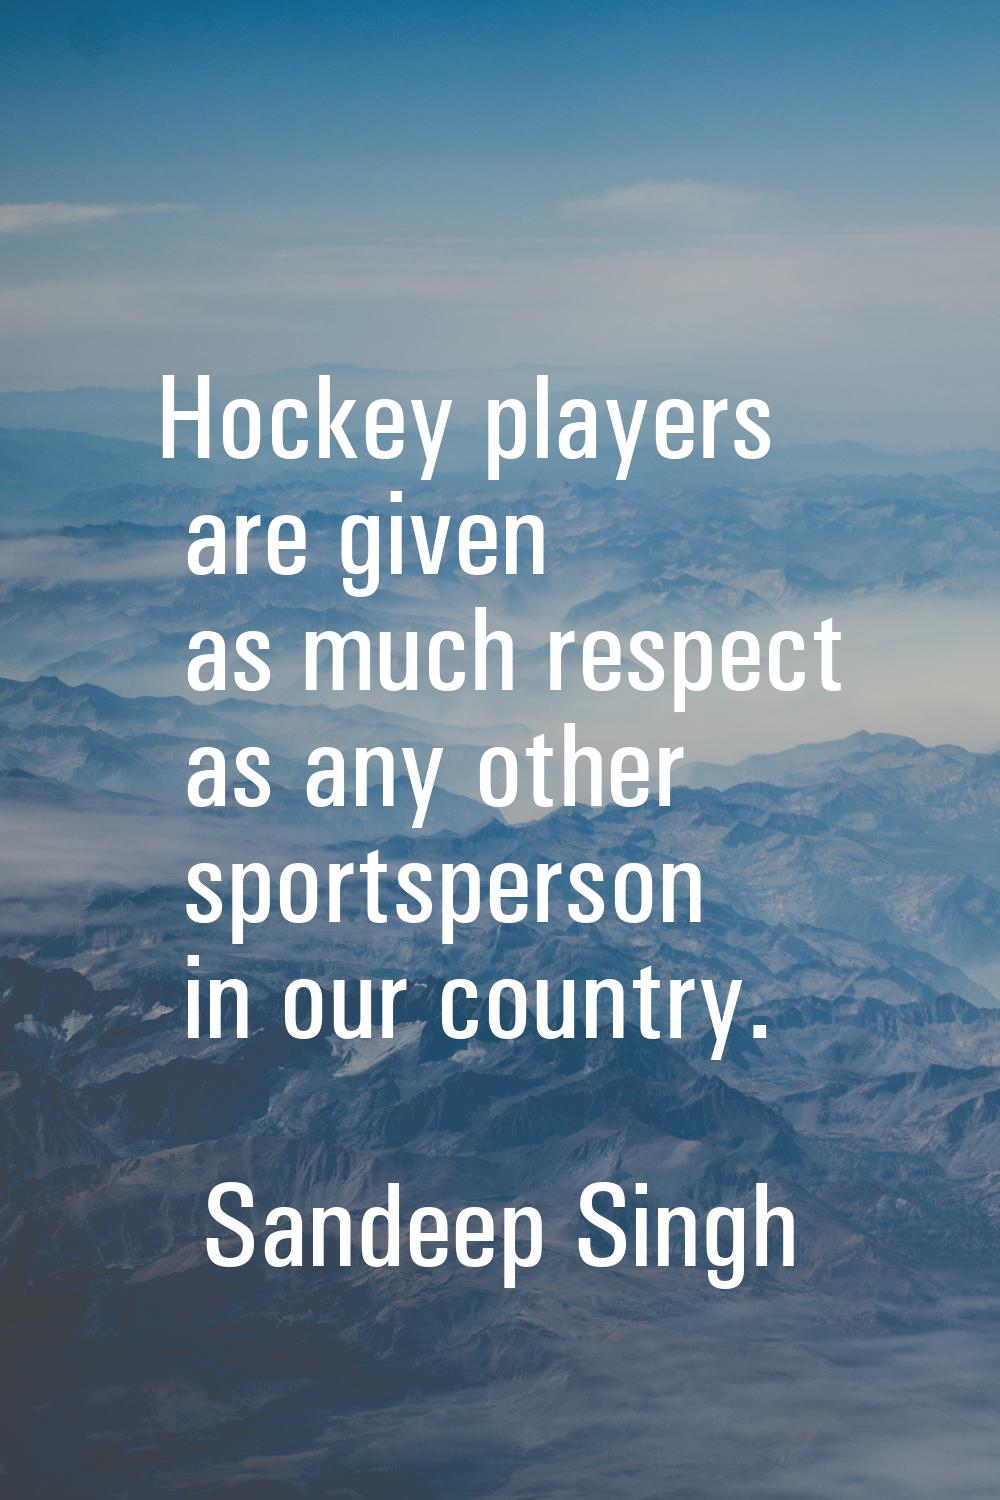 Hockey players are given as much respect as any other sportsperson in our country.